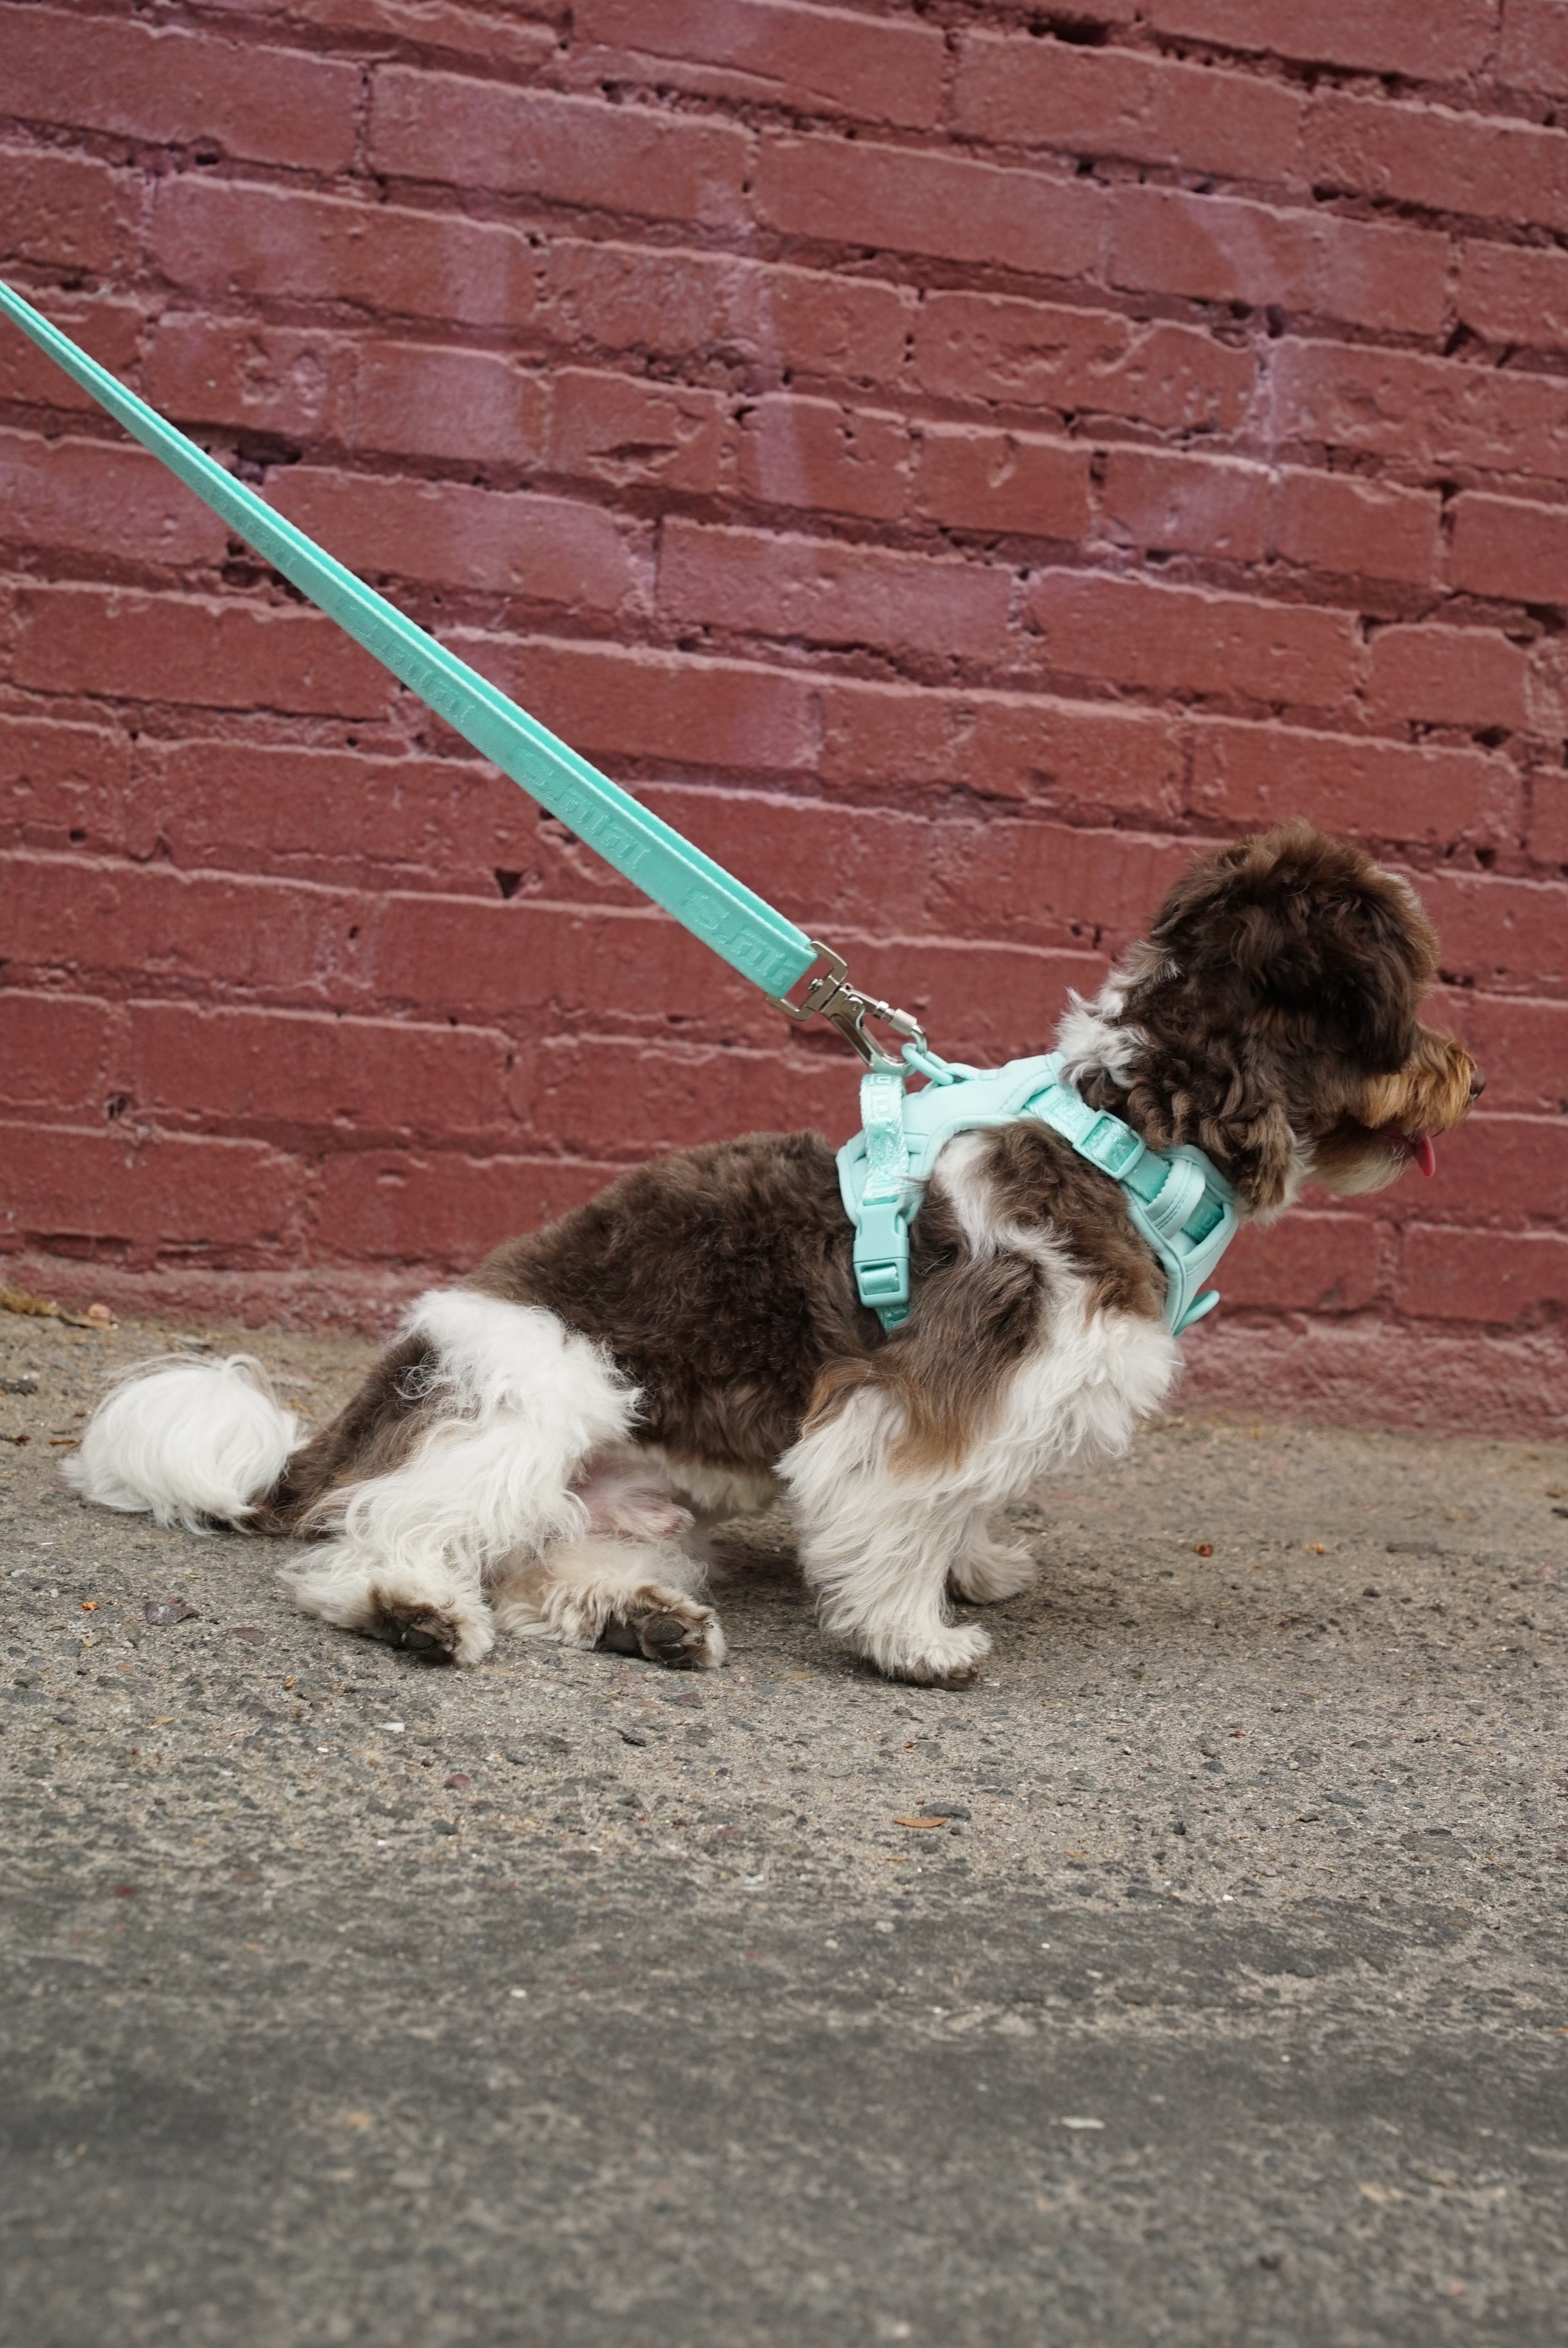 fluffy dog with a curly brown and white coat, wearing a Cali Blue harness. The dog is positioned in a sitting posture on a concrete sidewalk, facing to the right. The leash, matching the Cali Blue harness, is taut, suggesting the dog is being held back or is eager to move. The background consists of a red brick wall. The dog looks alert and has its tongue slightly out, giving a sense of excitement or interest in something off-camera